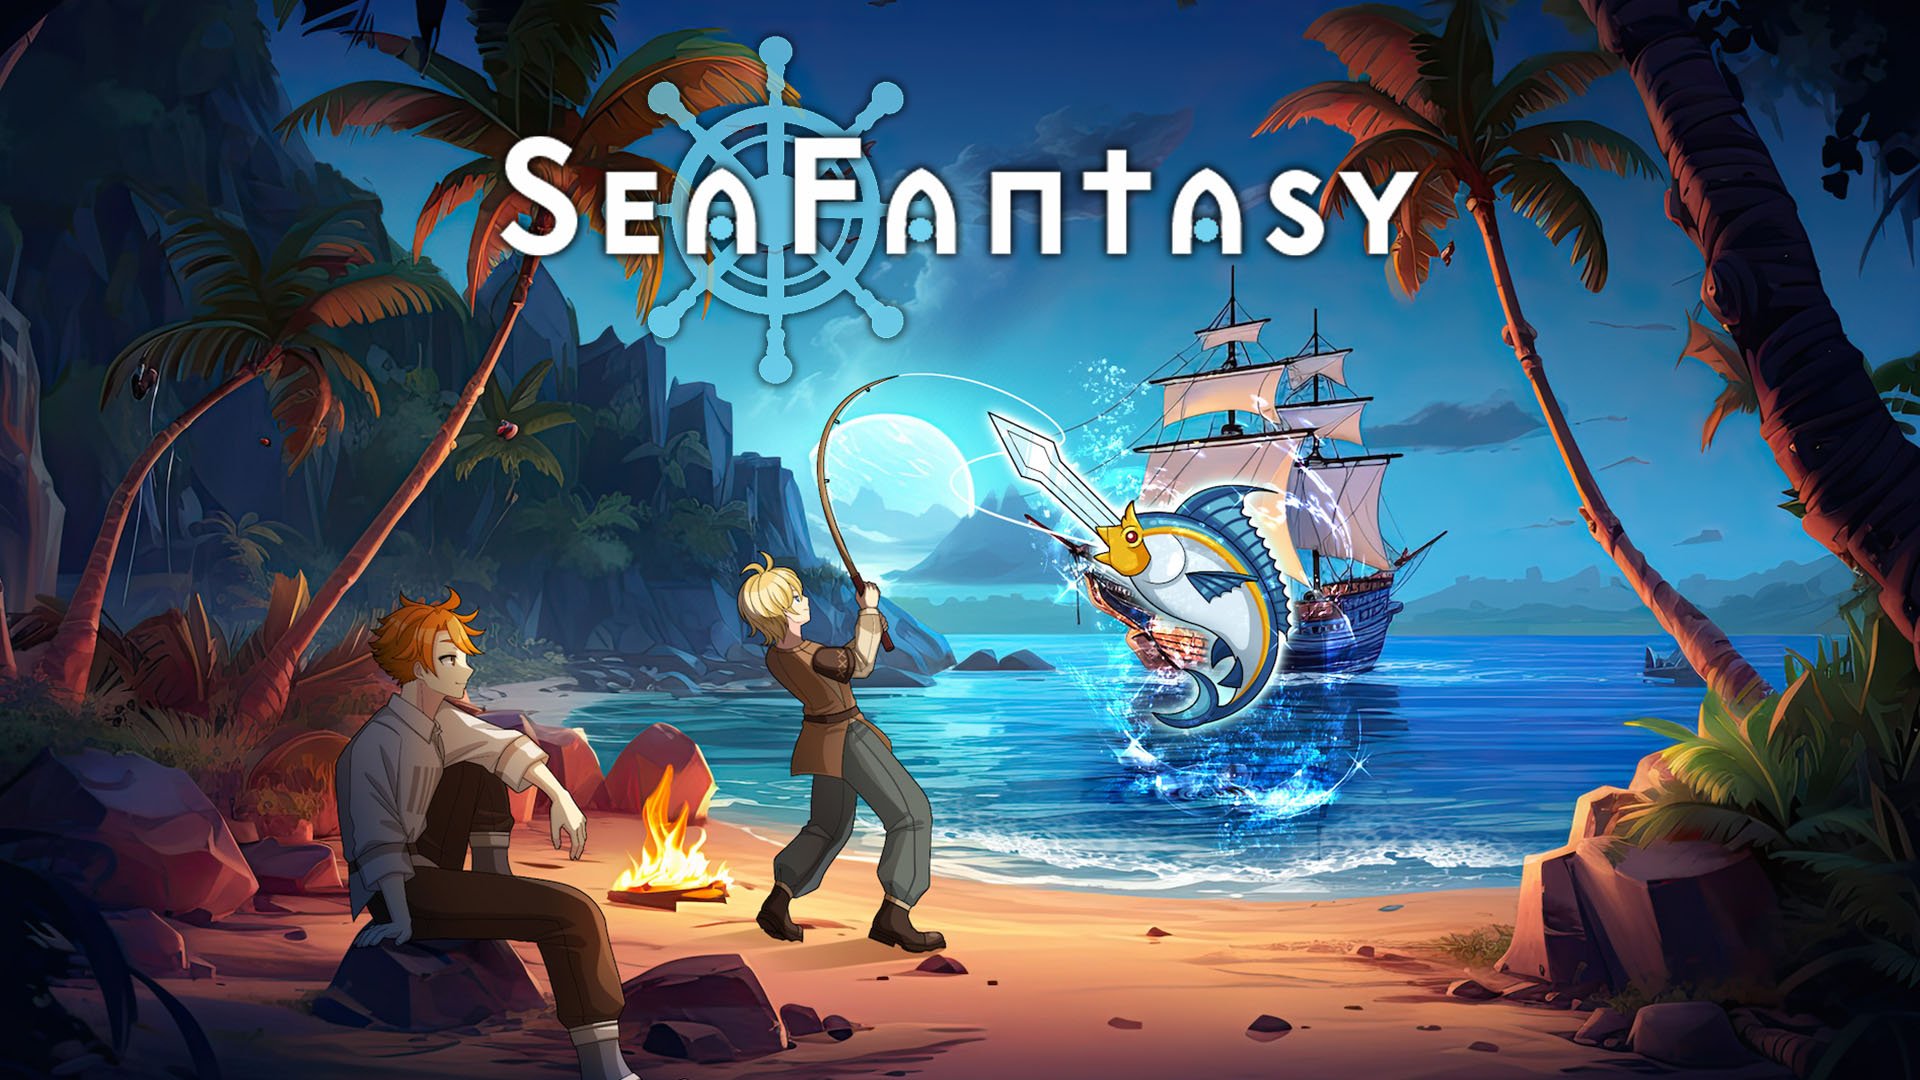 # Pixel art open-world action RPG Sea Fantasy announced for console, PC